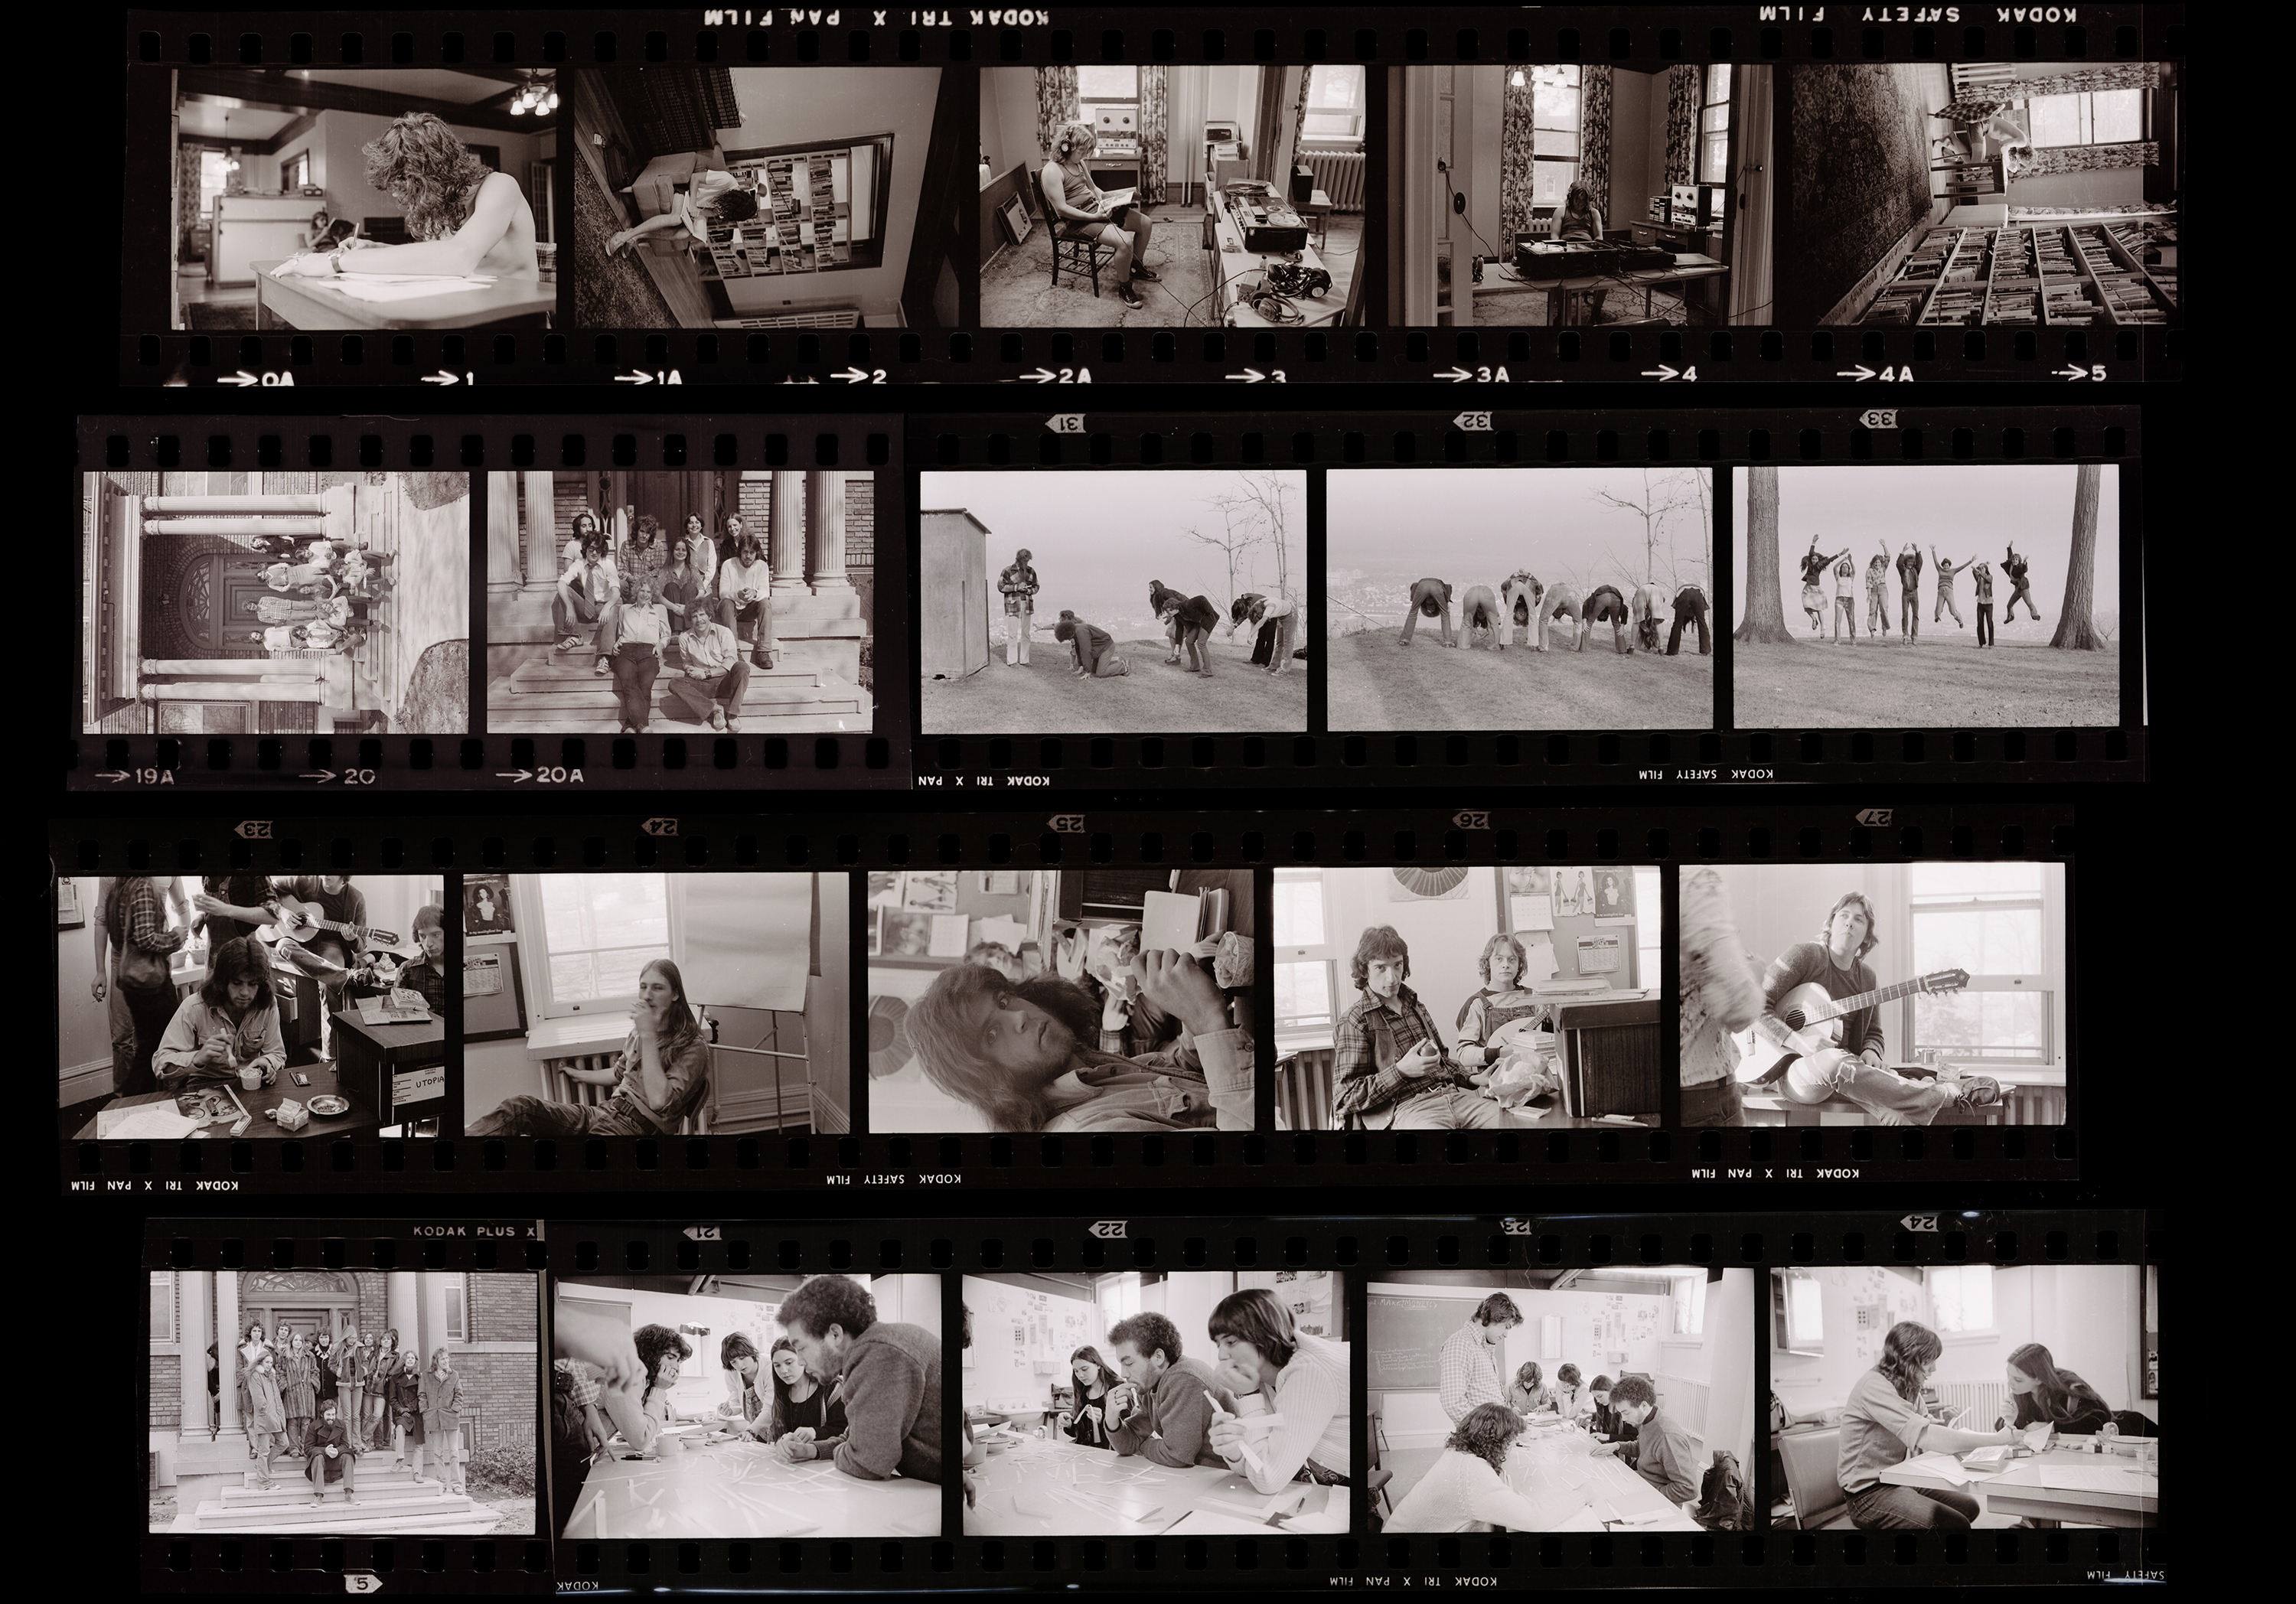 A contact sheet of images from the Cool School